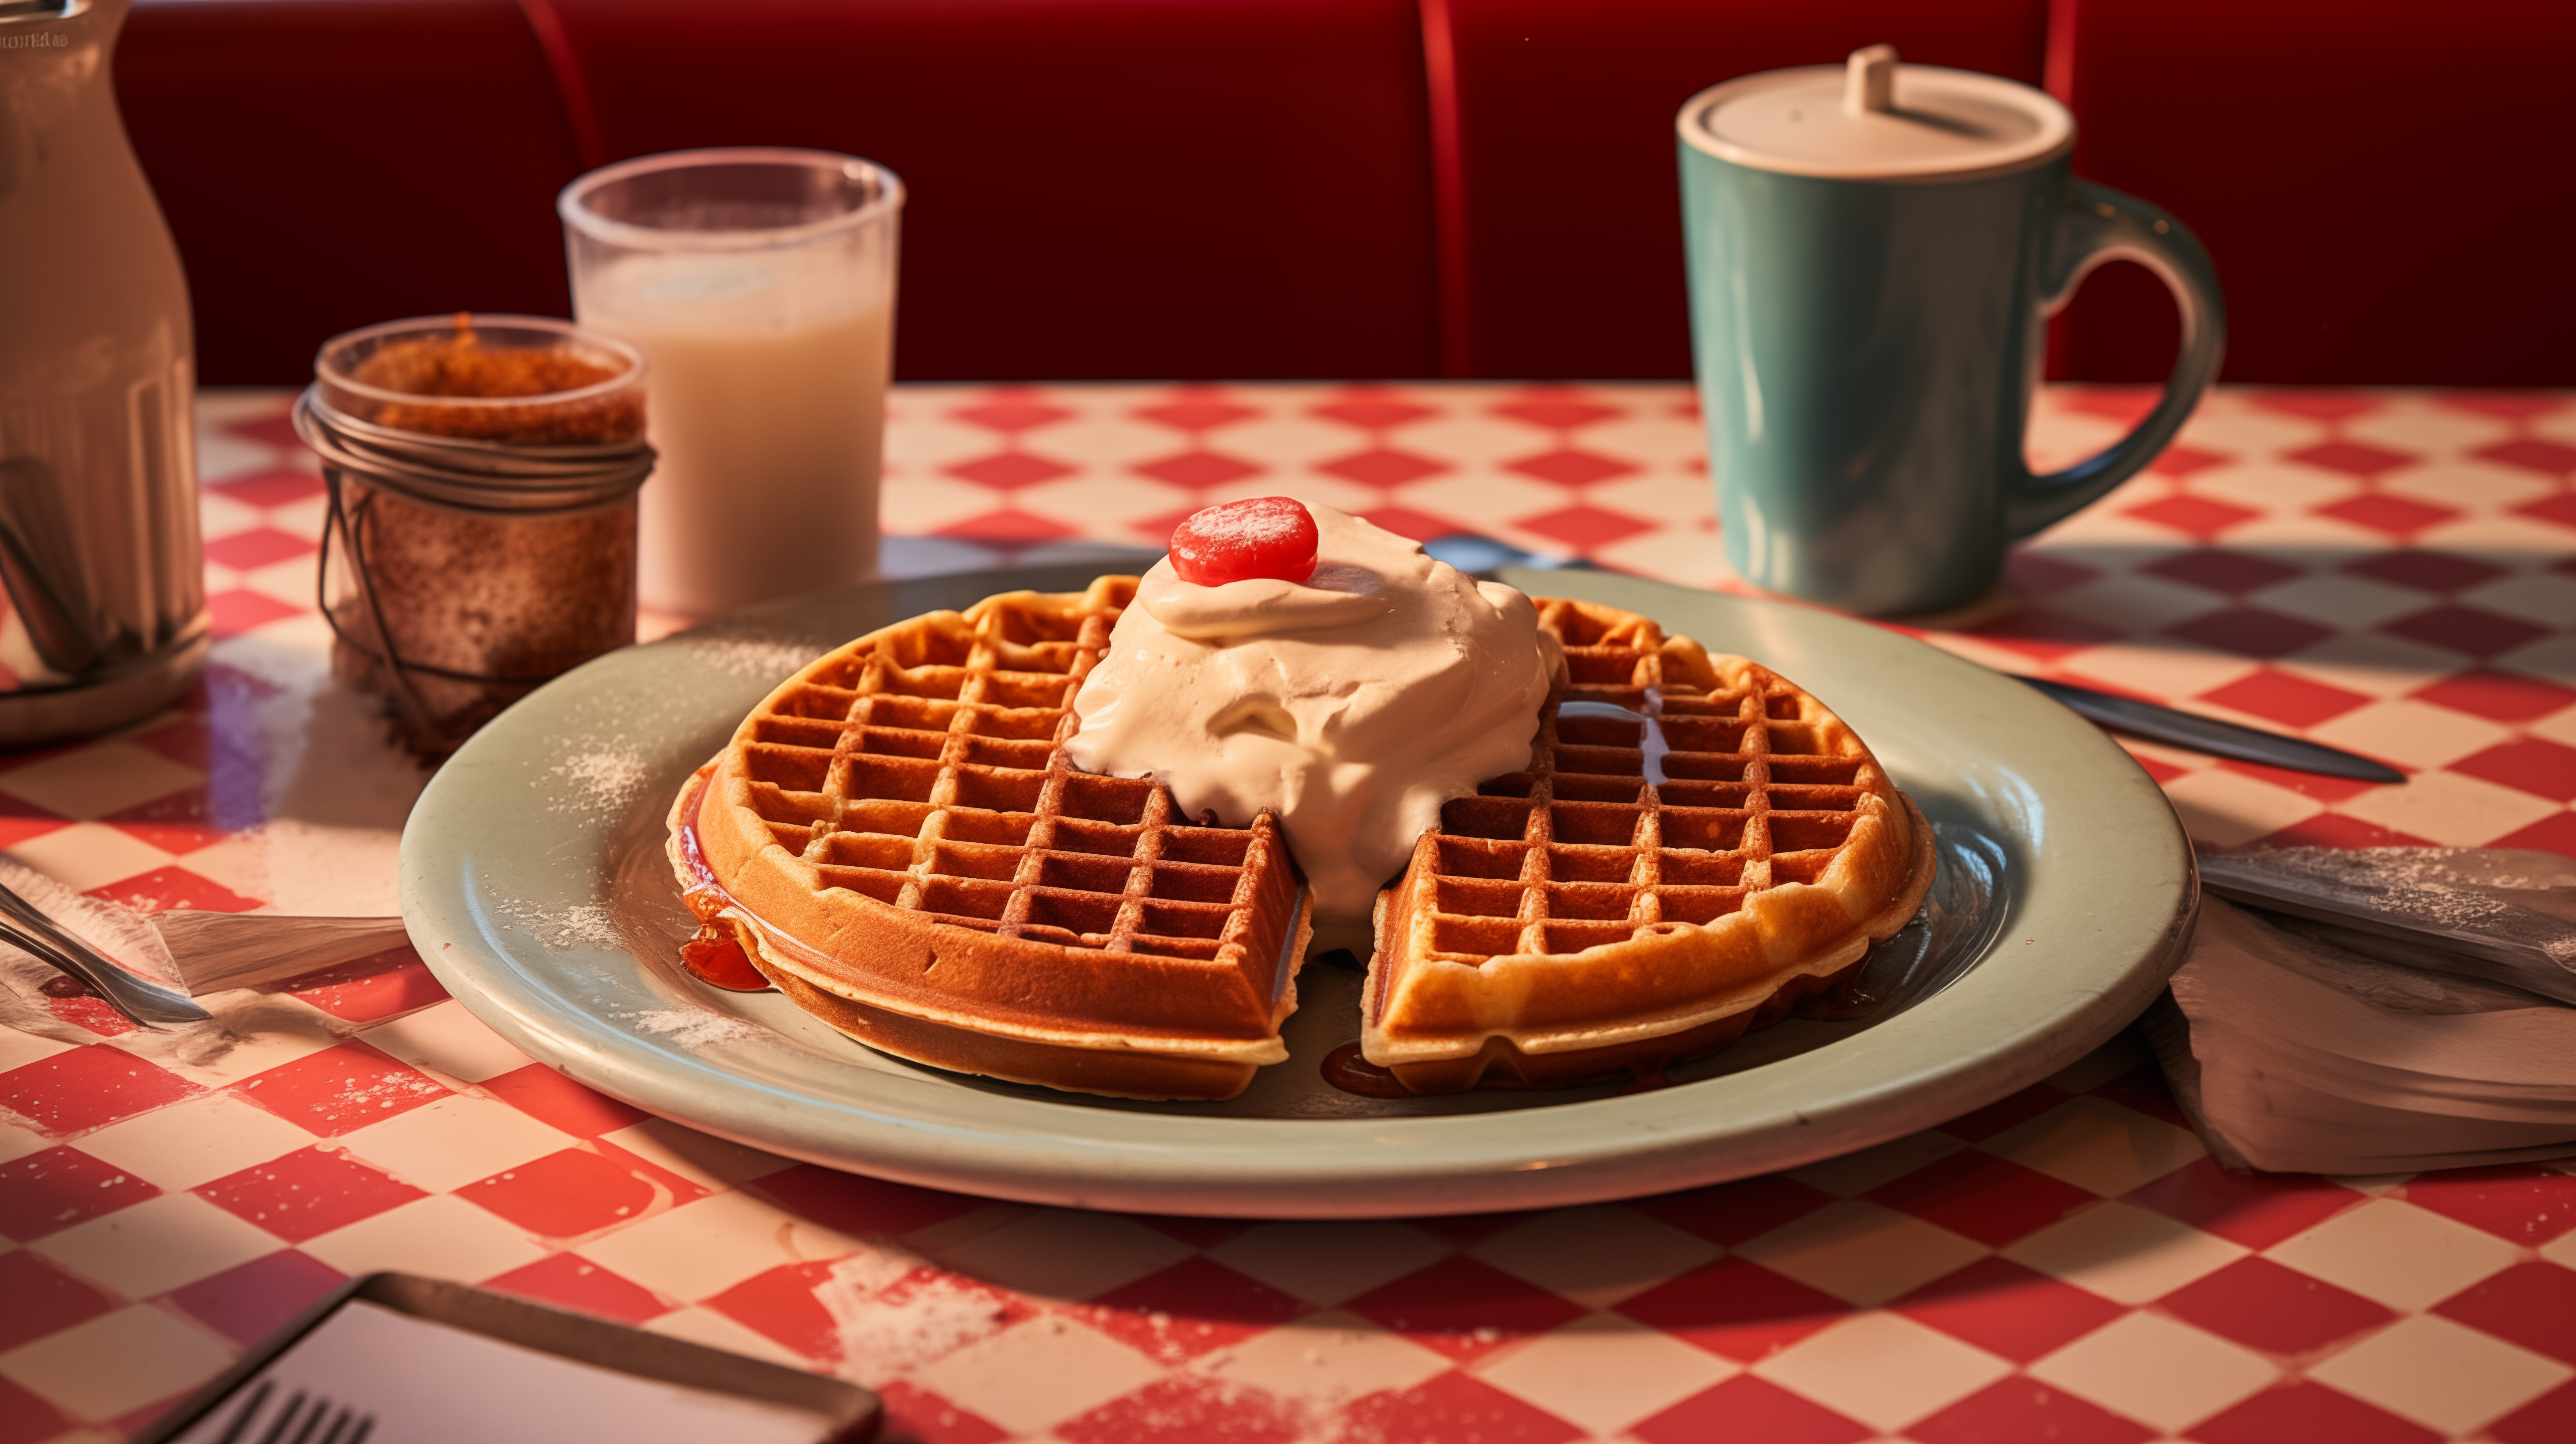 HD desktop wallpaper of freshly served waffle with creamy topping on a diner table with checkered tablecloth, accompanied by a mug and glass of milk.